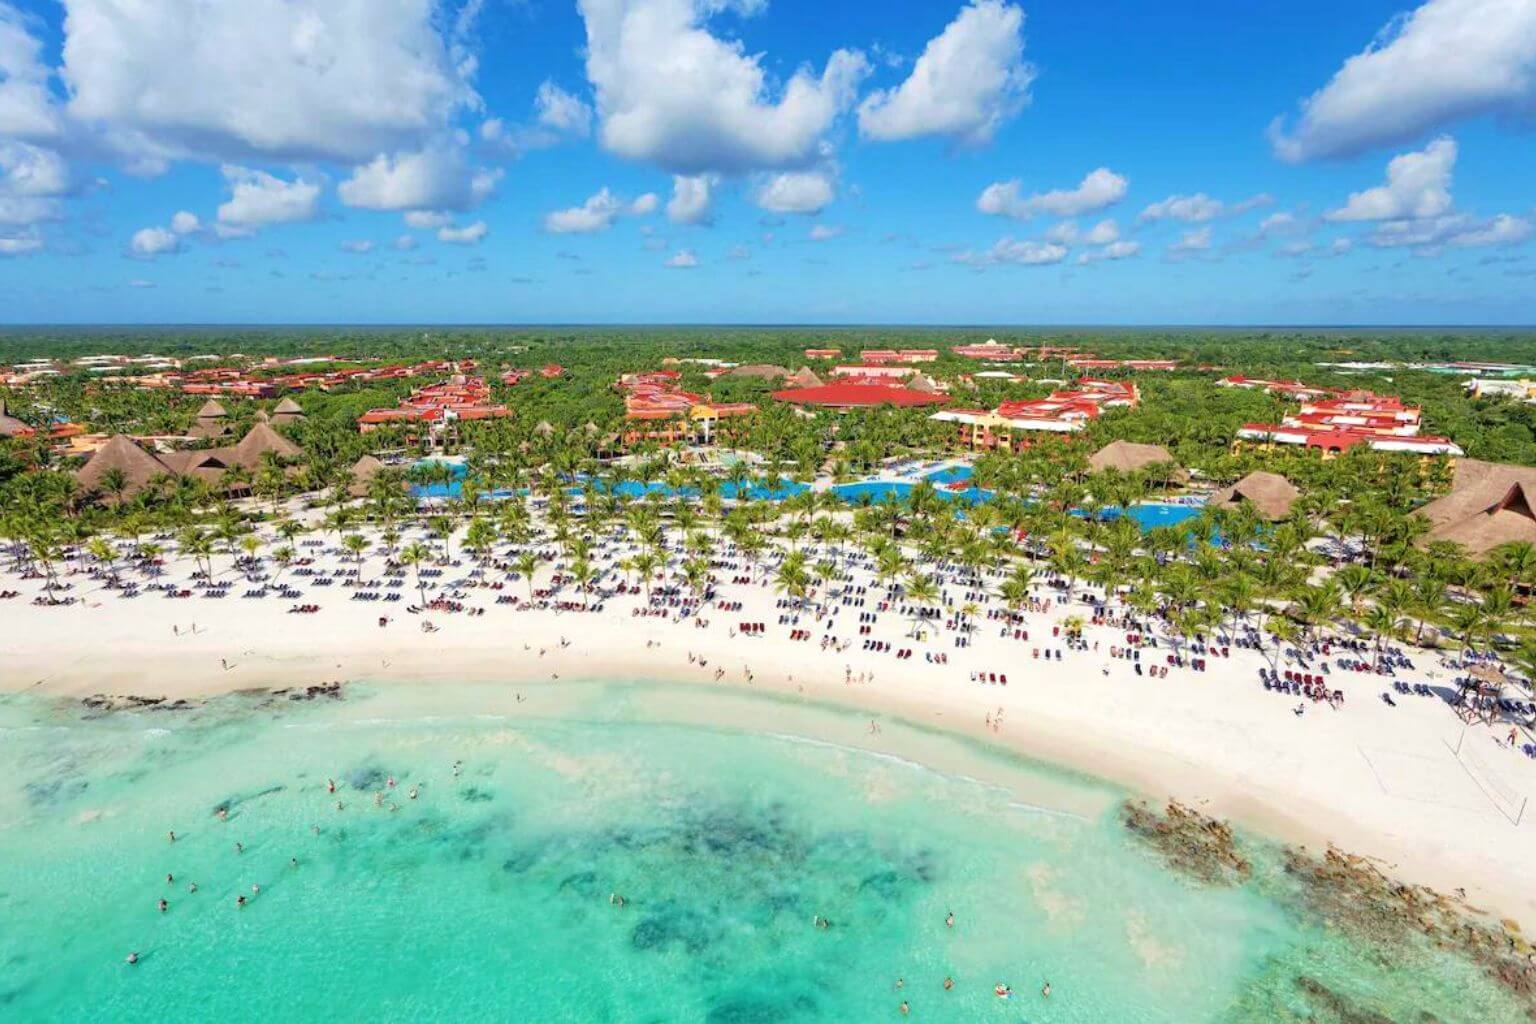 Aerial view from the ocean looking at the beach area of the Barcelo Maya Tropical Hotel.